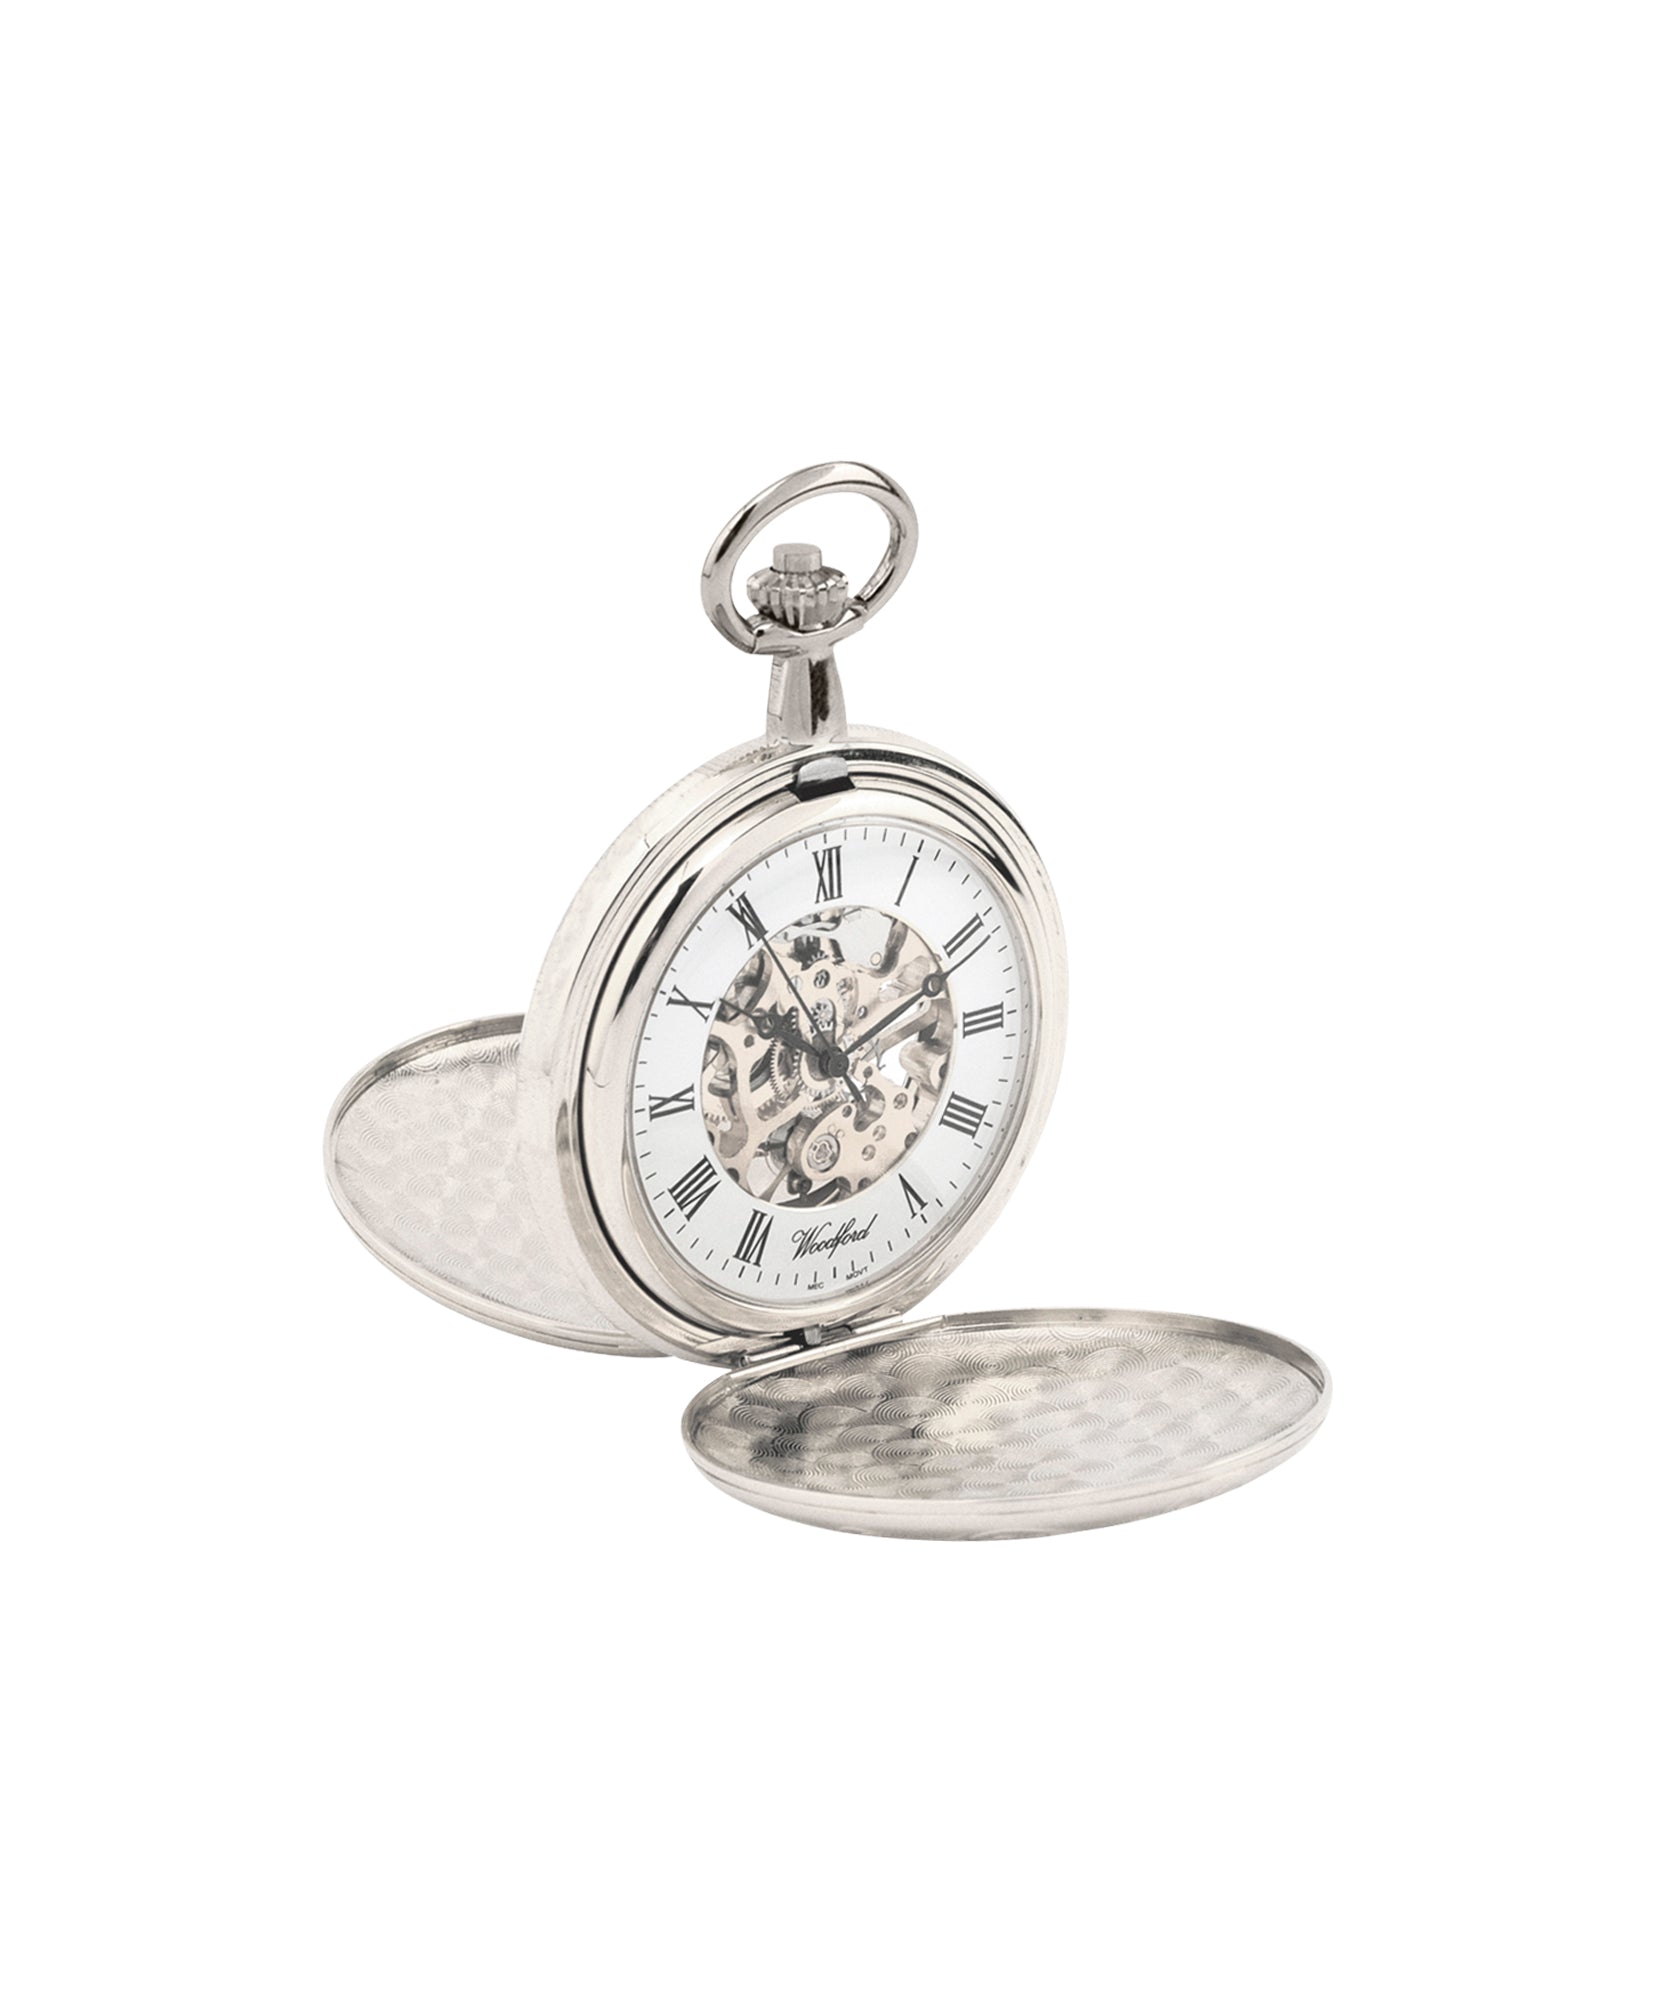 Burleigh Chrome Skeleton Pocket Watch With Chain  This is a wind up watch. It comes with a matching watch chain.